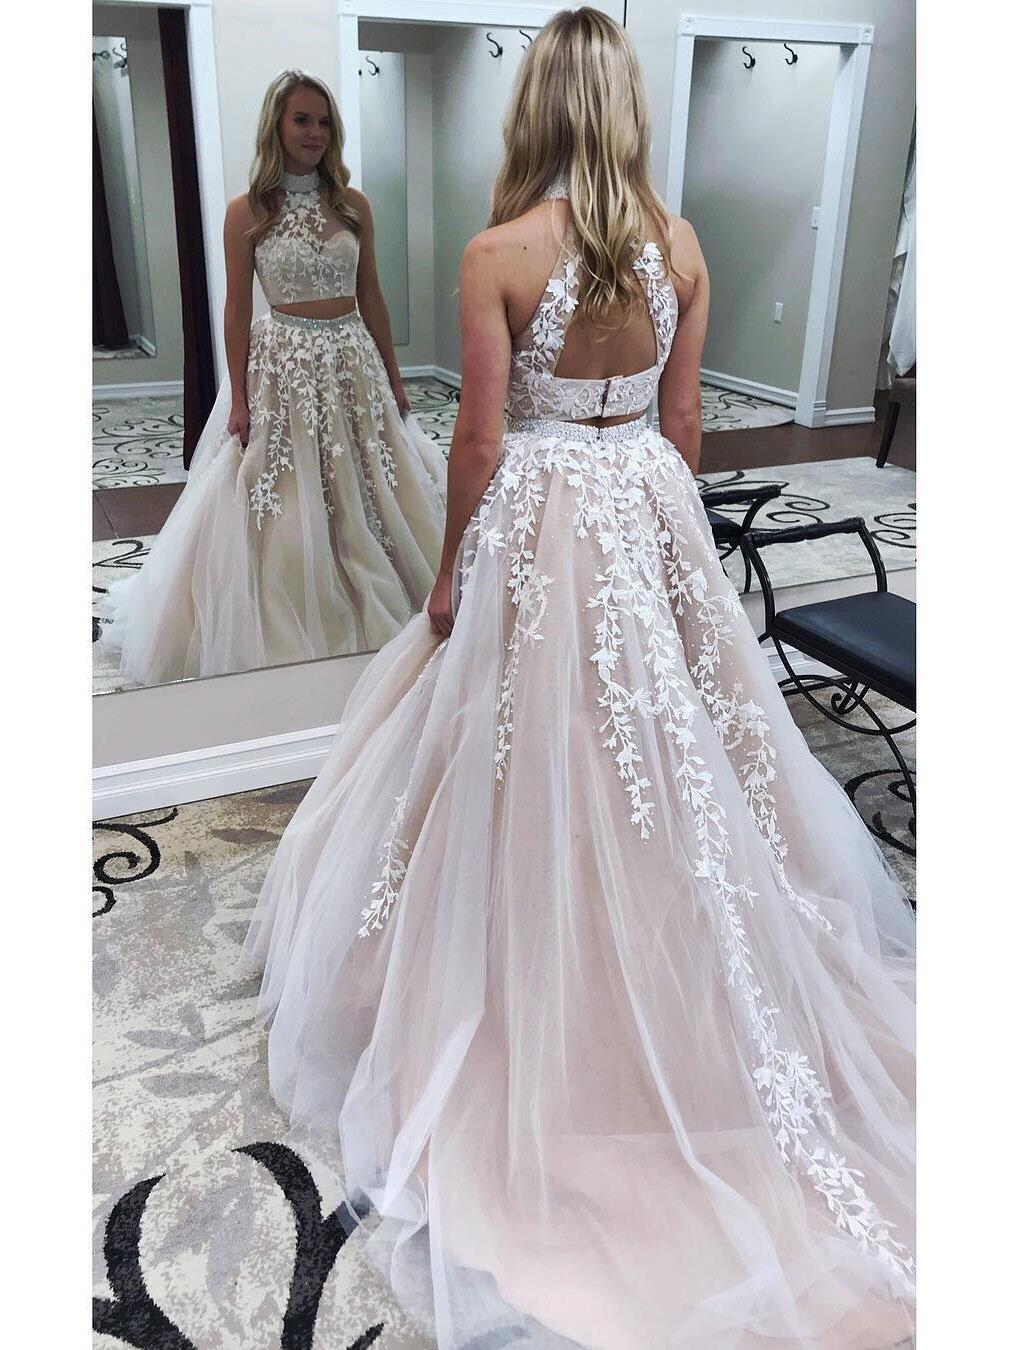 Princess A Line White Lace Appliqued Prom Dresseshigh Neck Two Piece Tulle Prom Dress On Luulla 5250